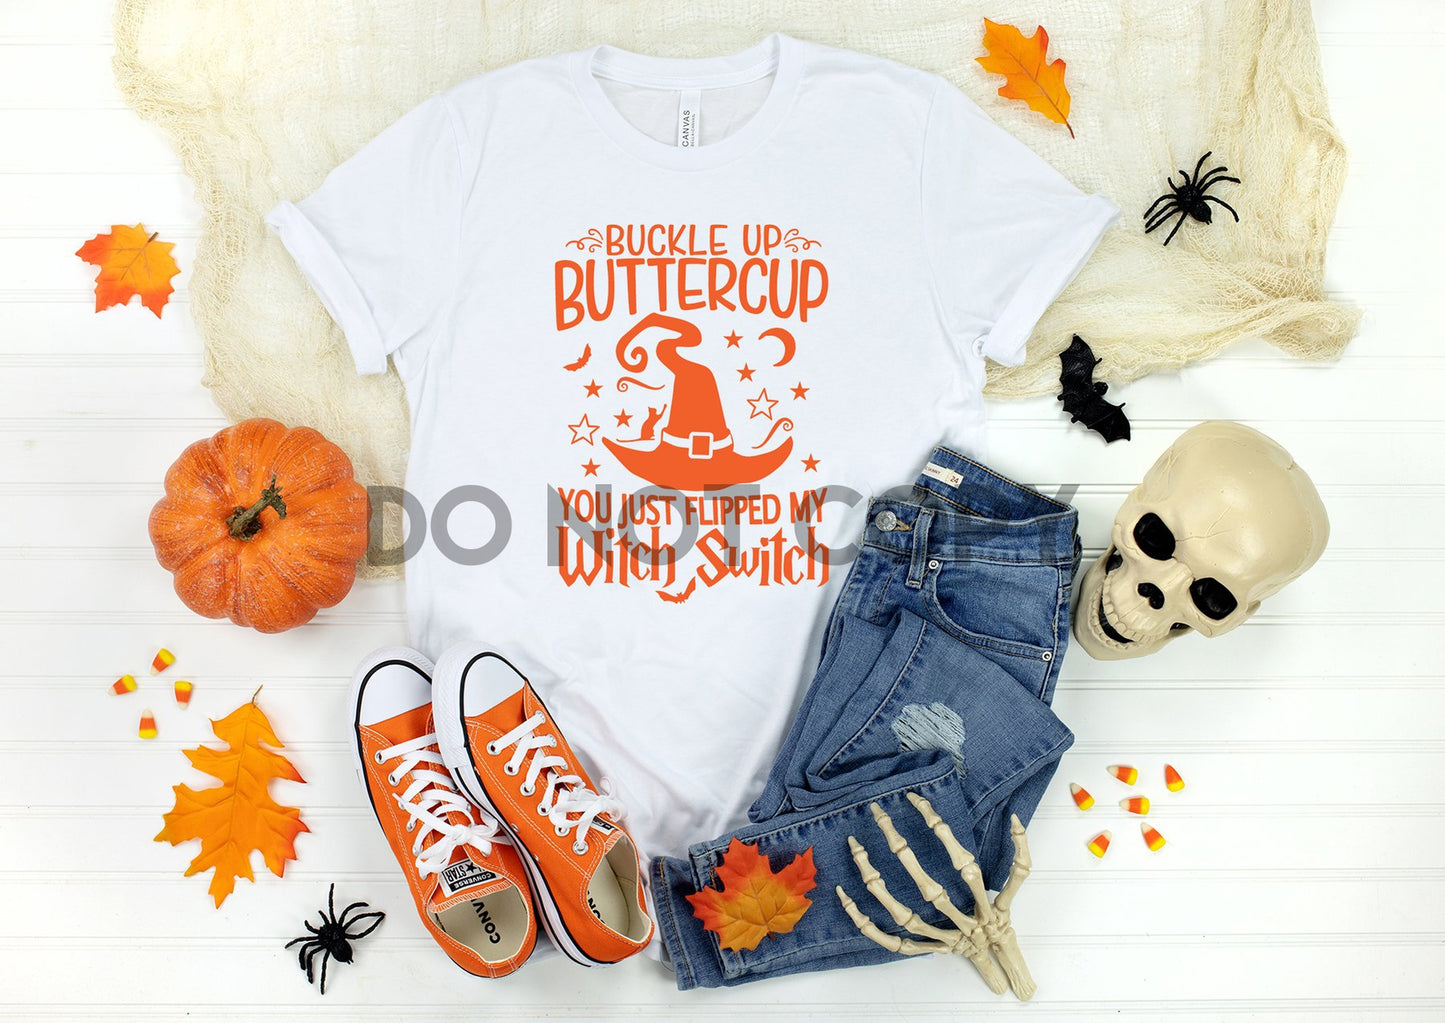 Buckle Up Buttercup You Just Flipped my Witch Switch Hat Orange Sublimation Print